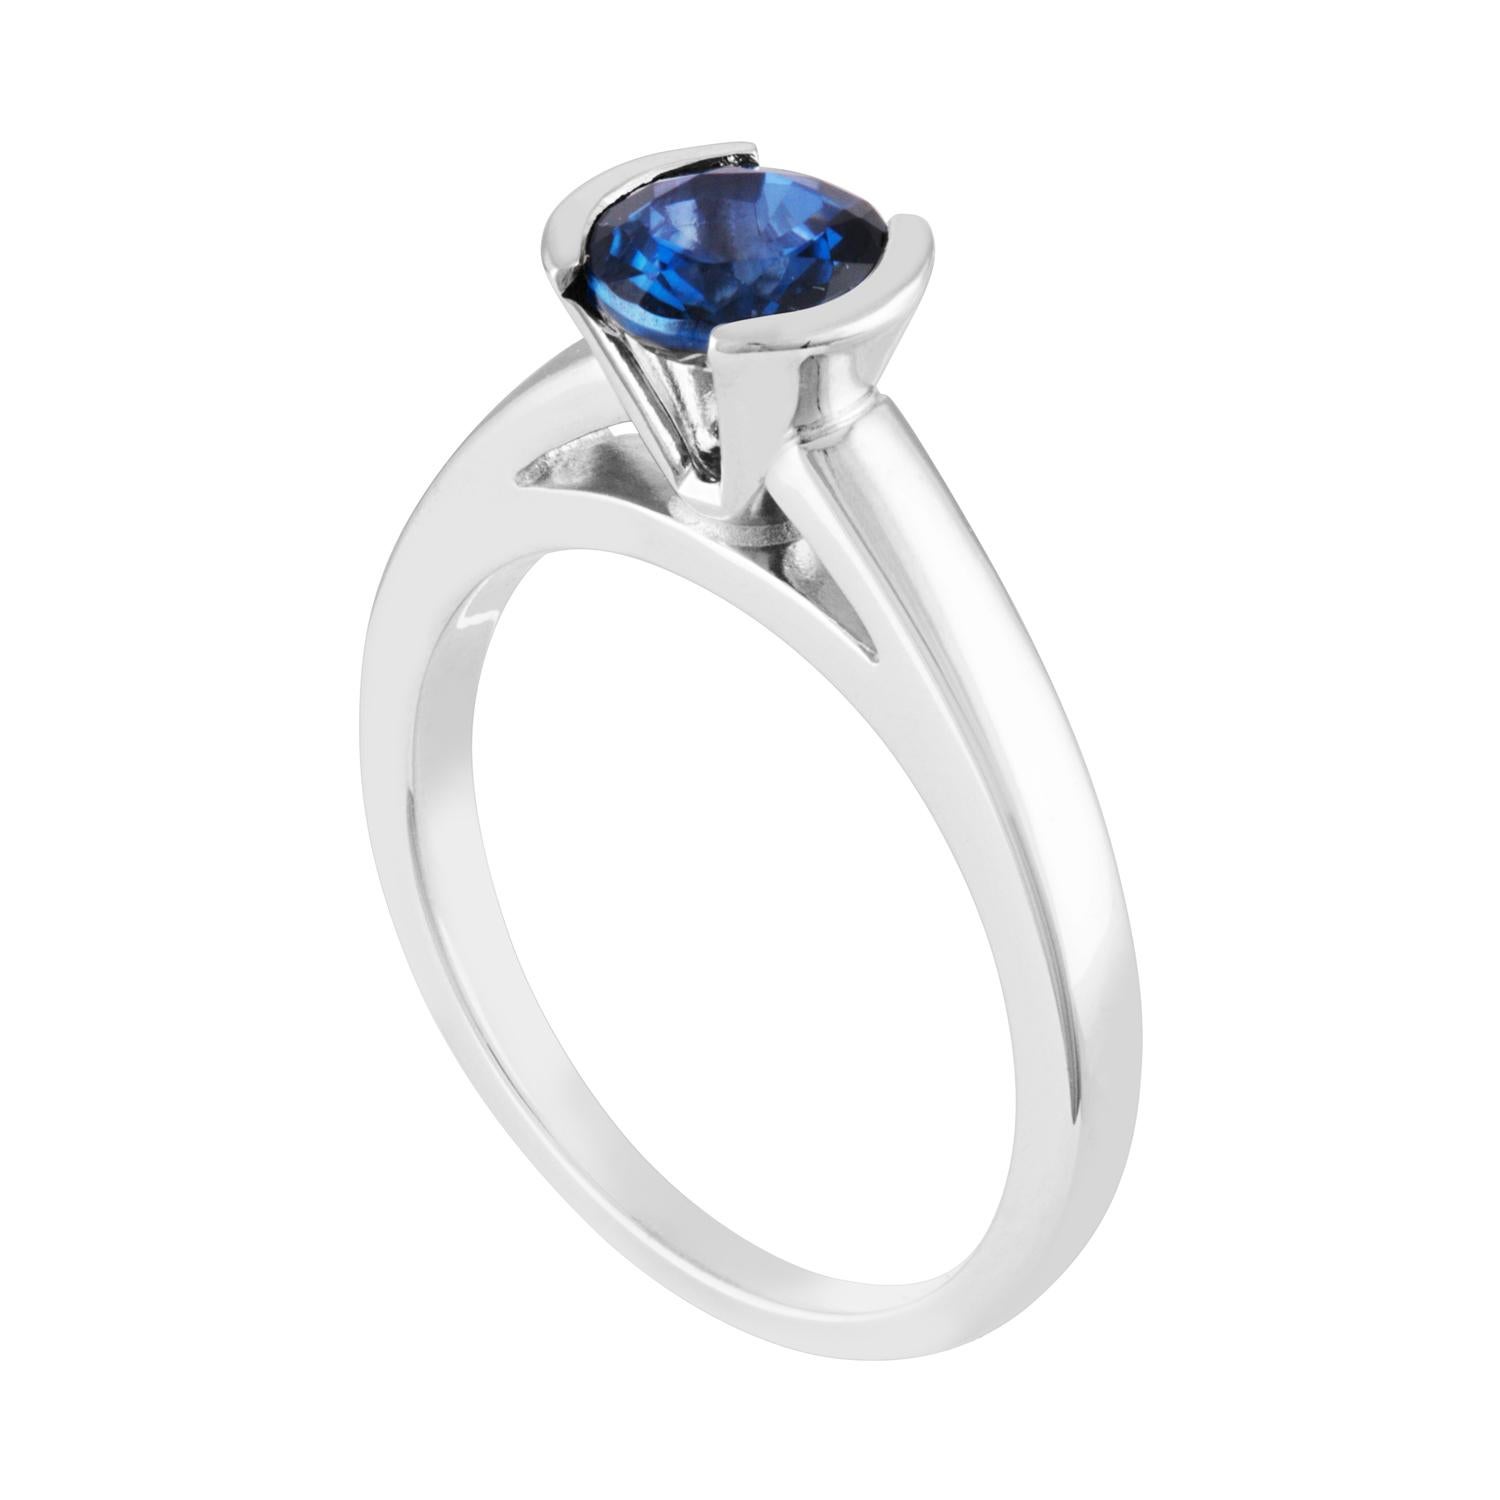 Solitaire Half Bezel Engagement Ring
The ring is 14K White Gold
The Blue Sapphire is a round 1.30 Carat Heated
The ring is a size 7.00, sizable.
The ring weighs 4.5 grams